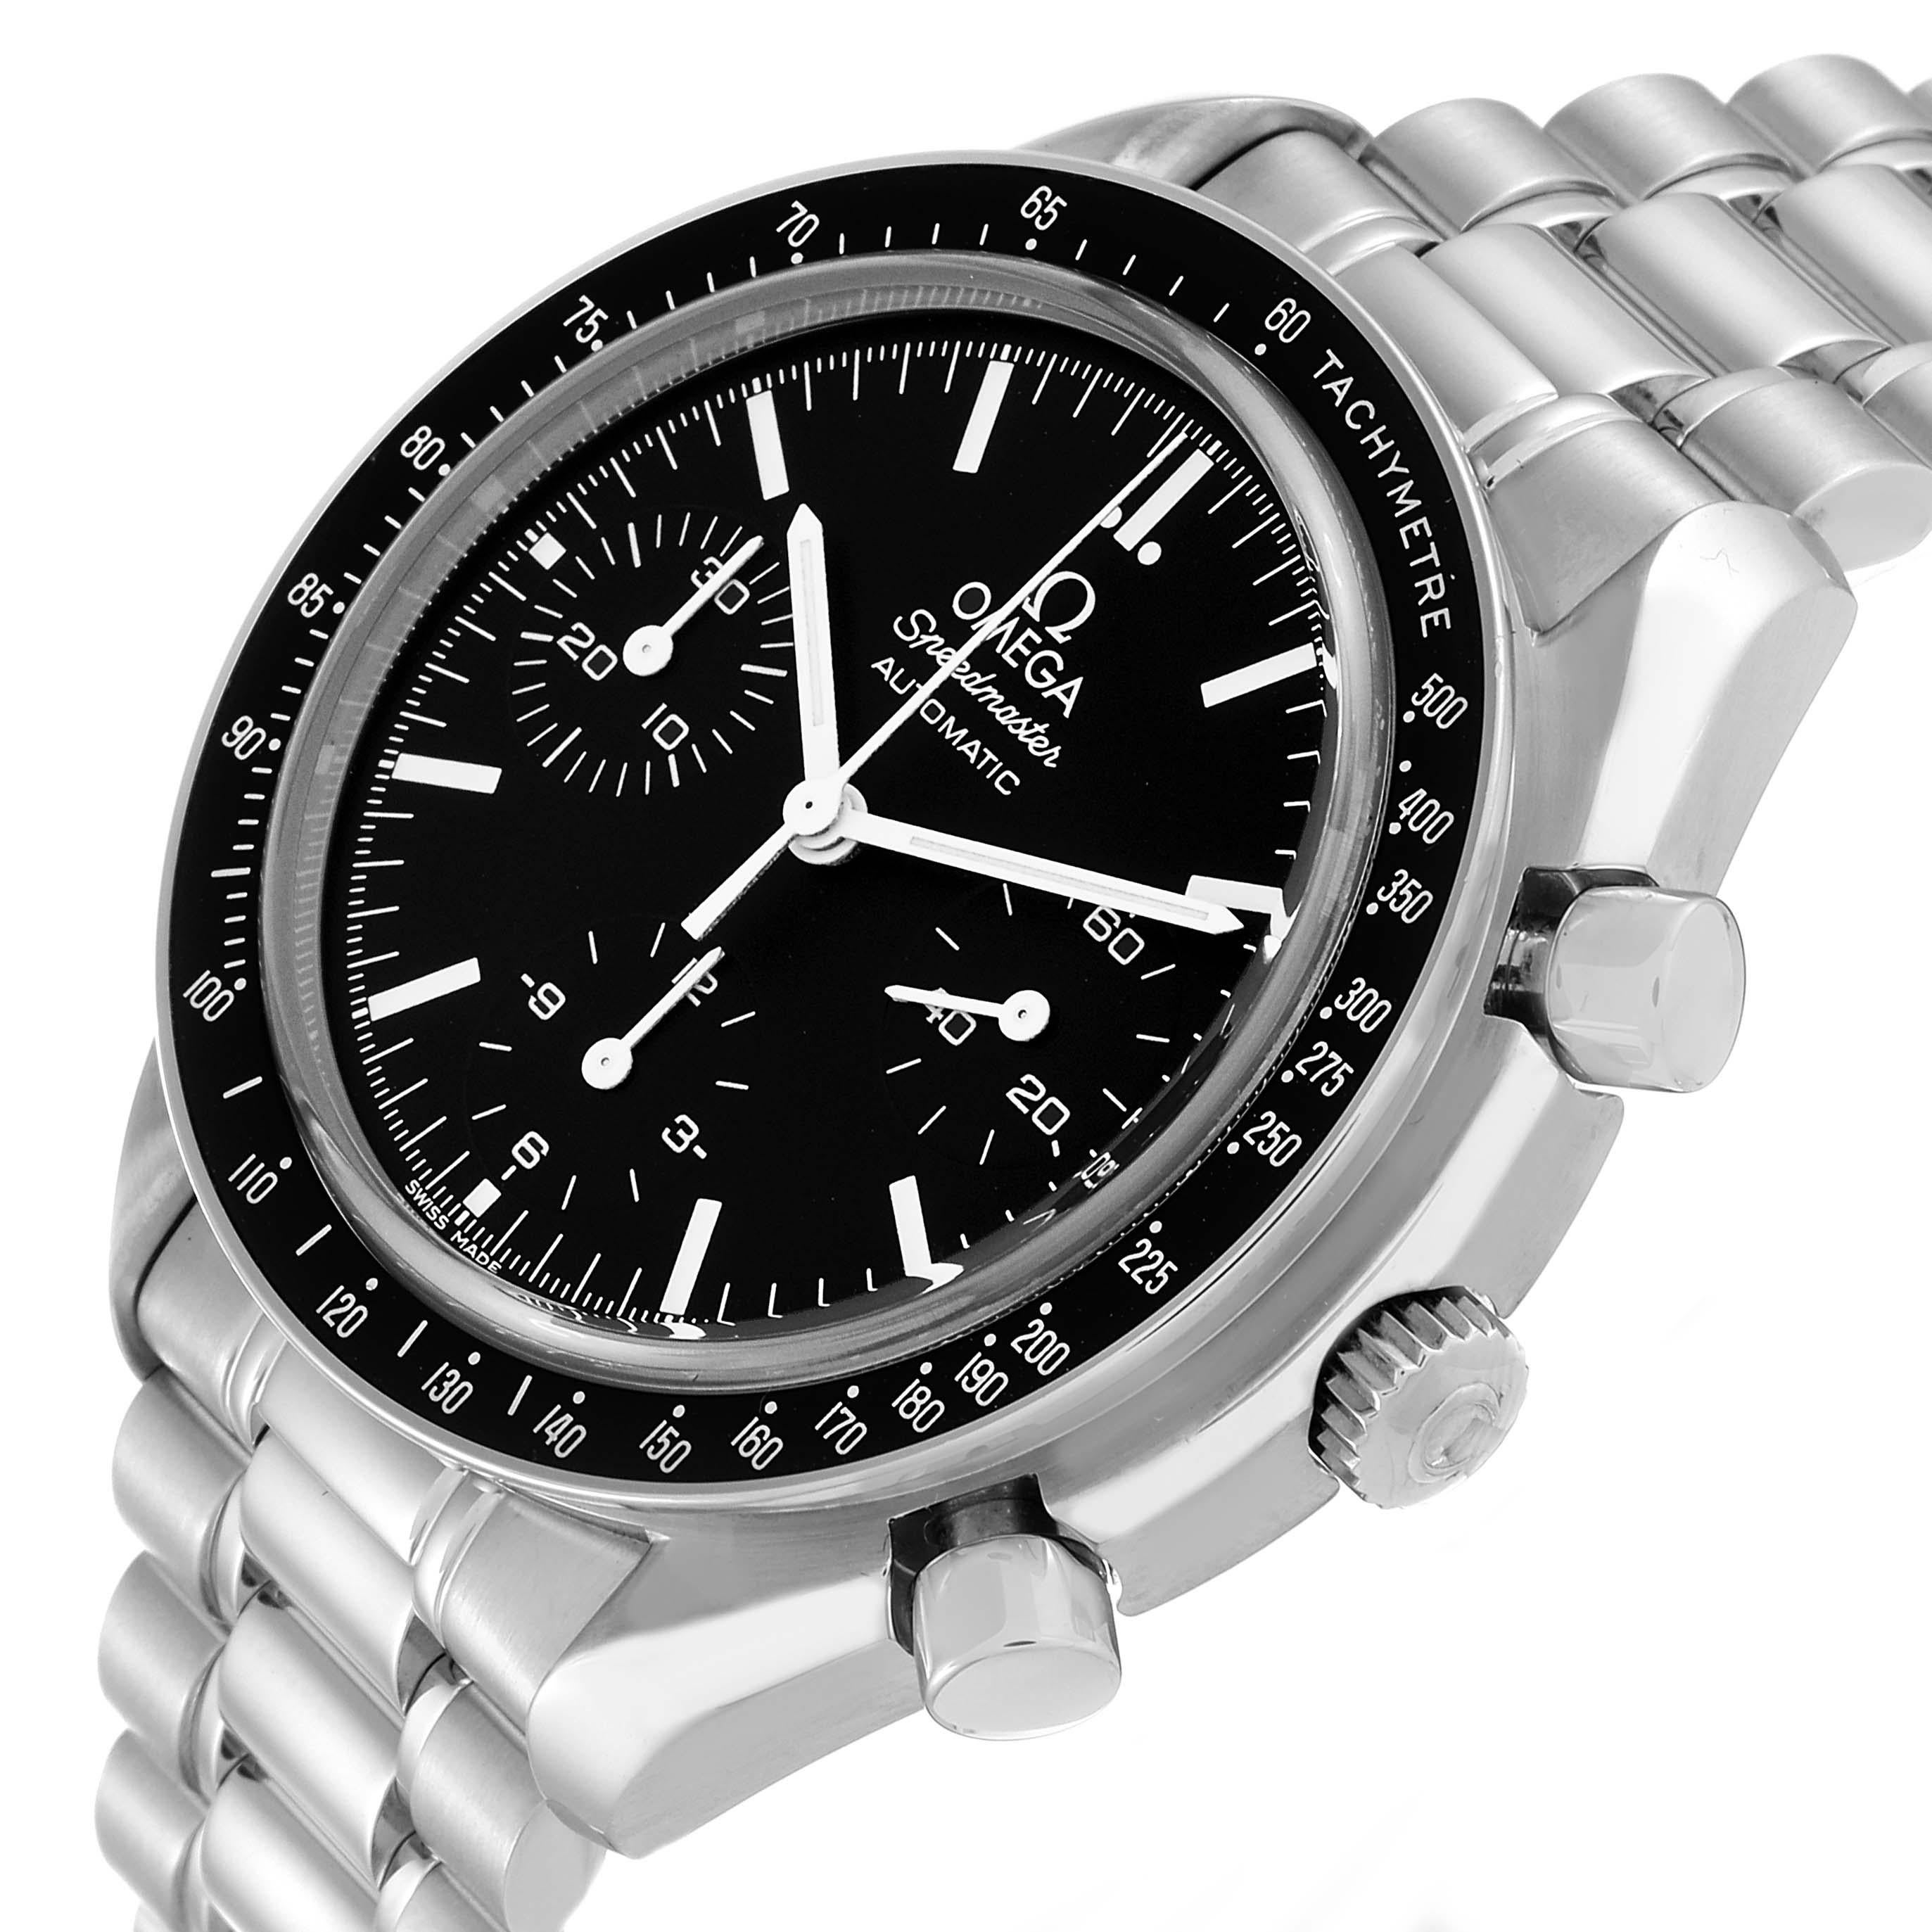 Omega Speedmaster Reduced Chronograph Steel Mens Watch 3539.50.00 For Sale 1